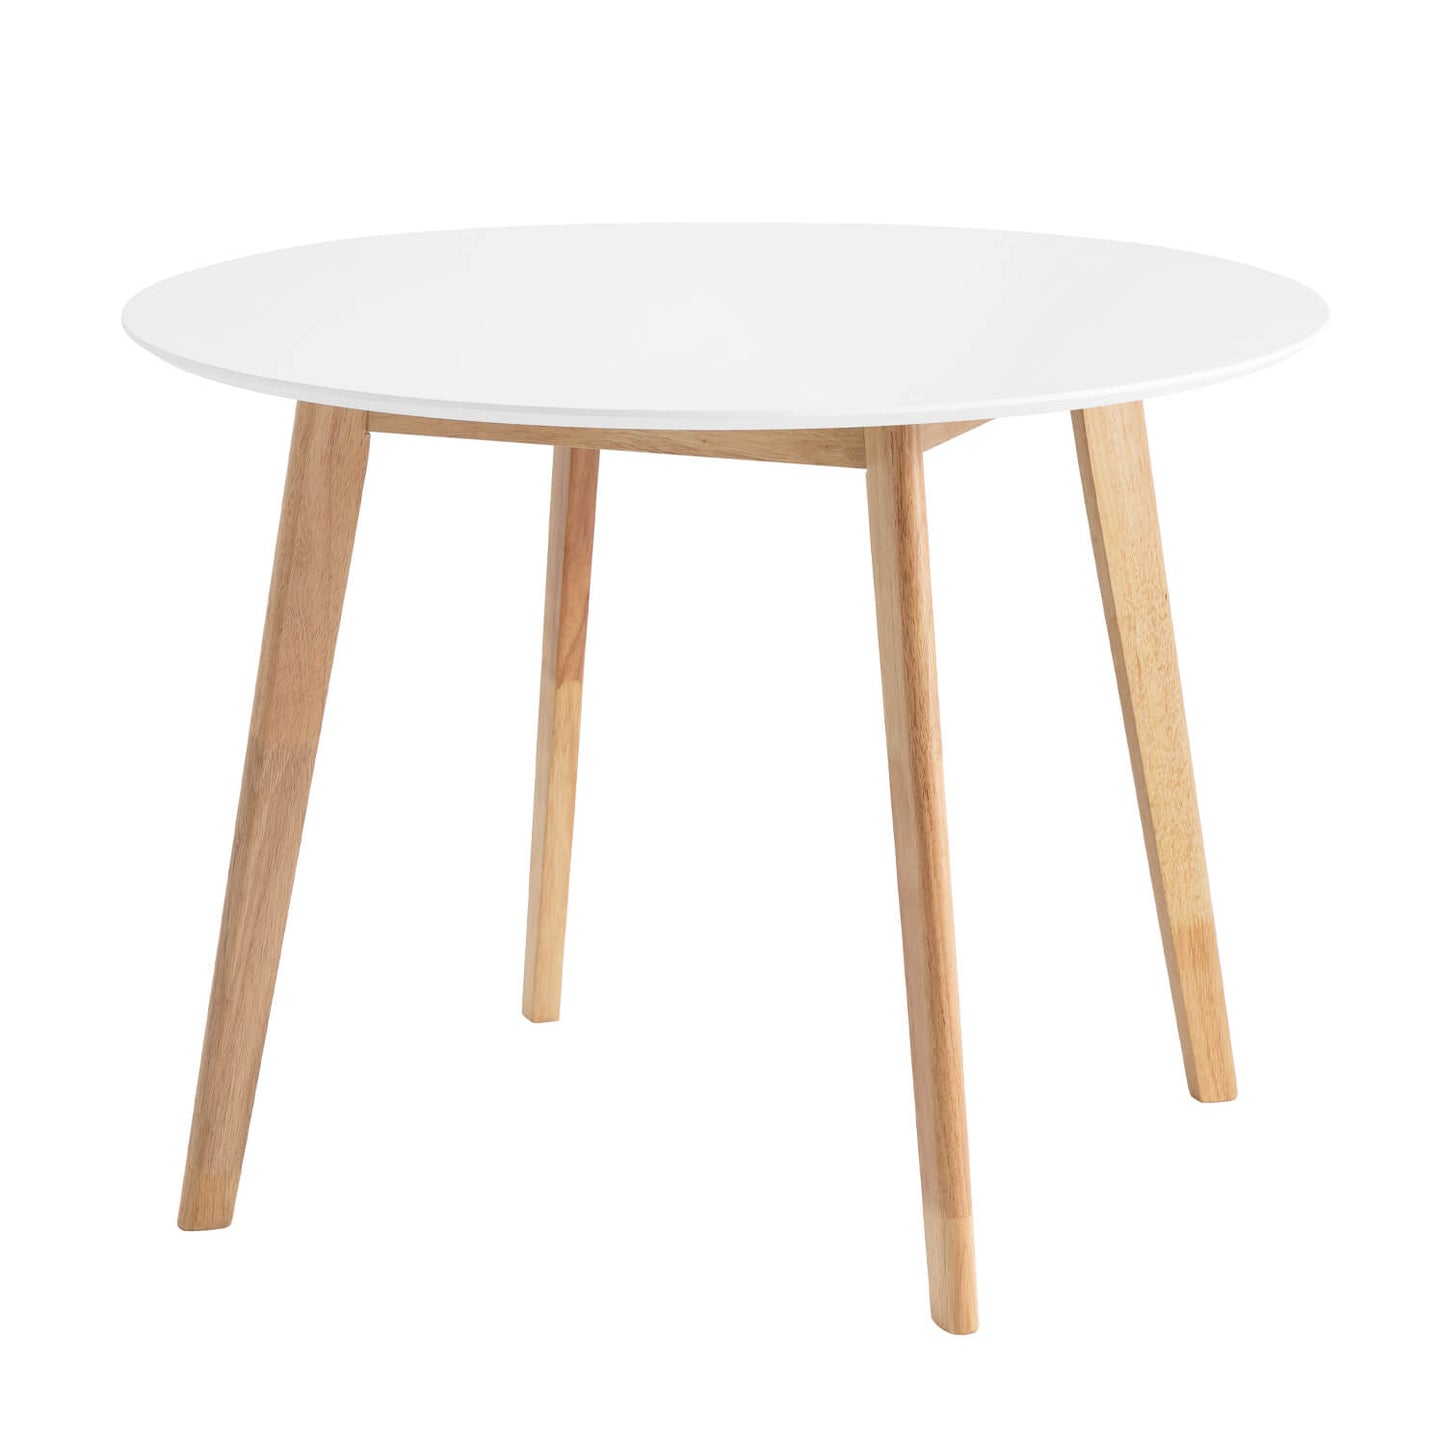 Monna dining table